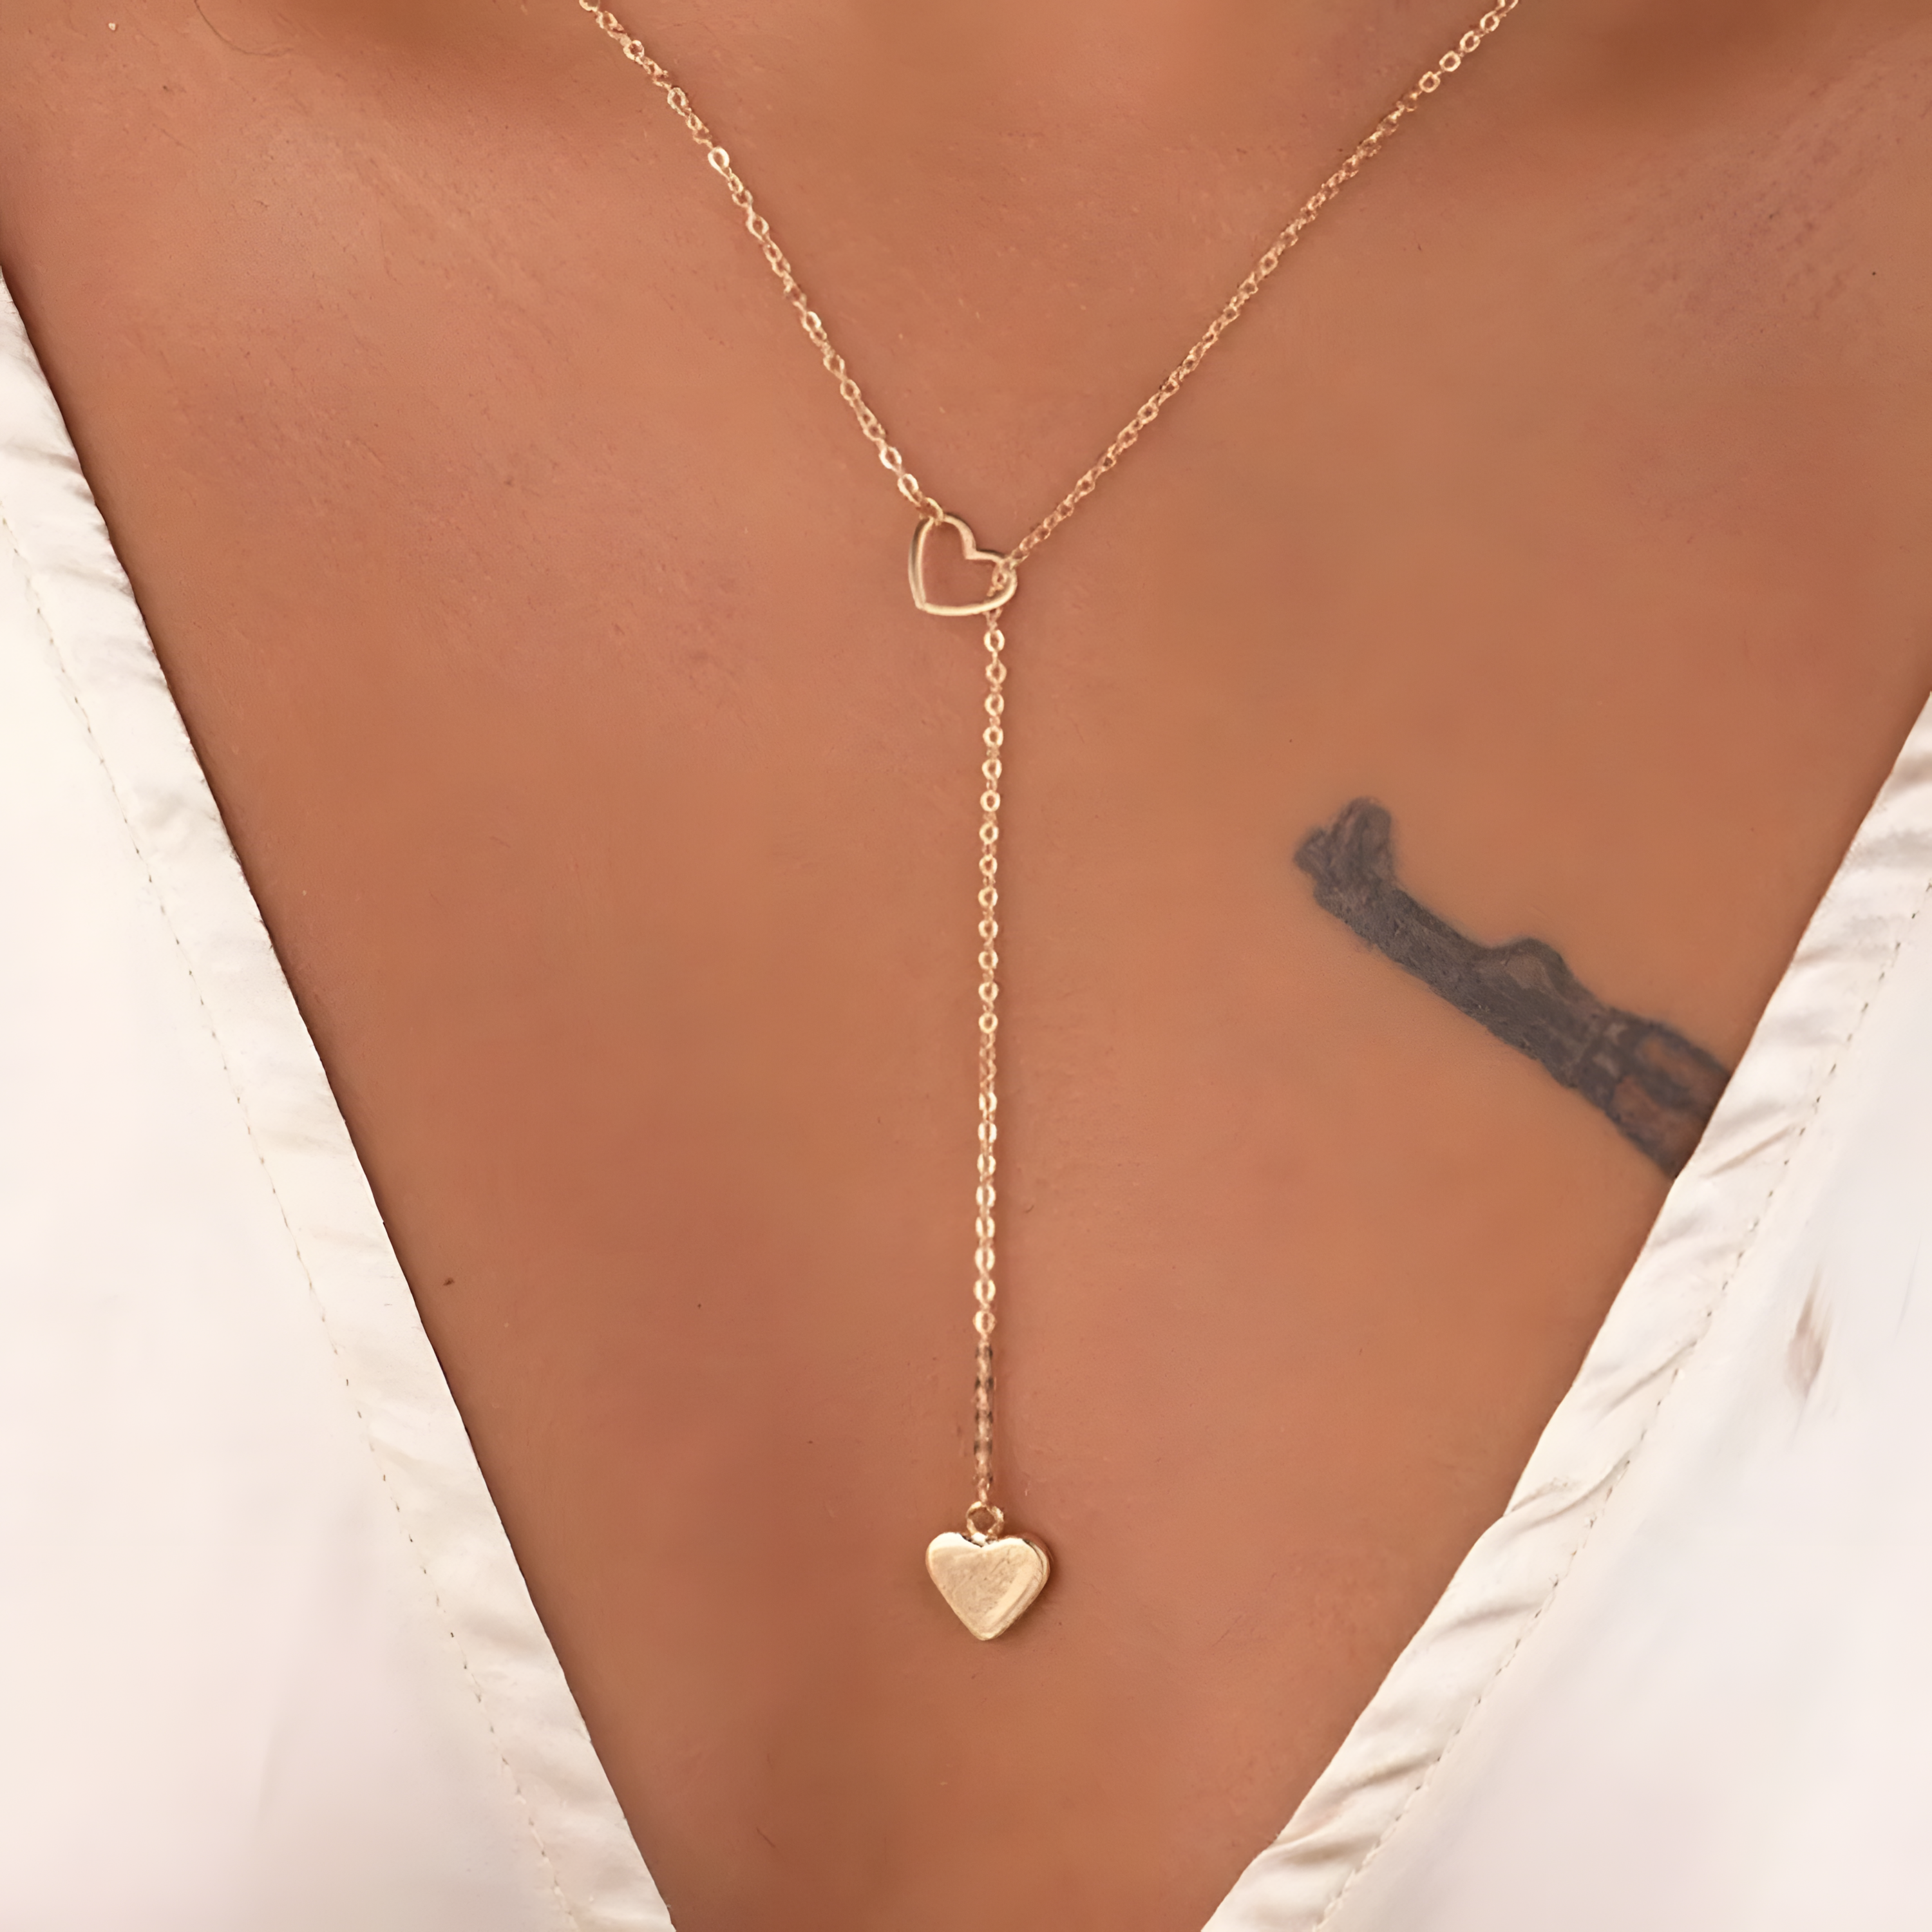 Amphiheart Necklace